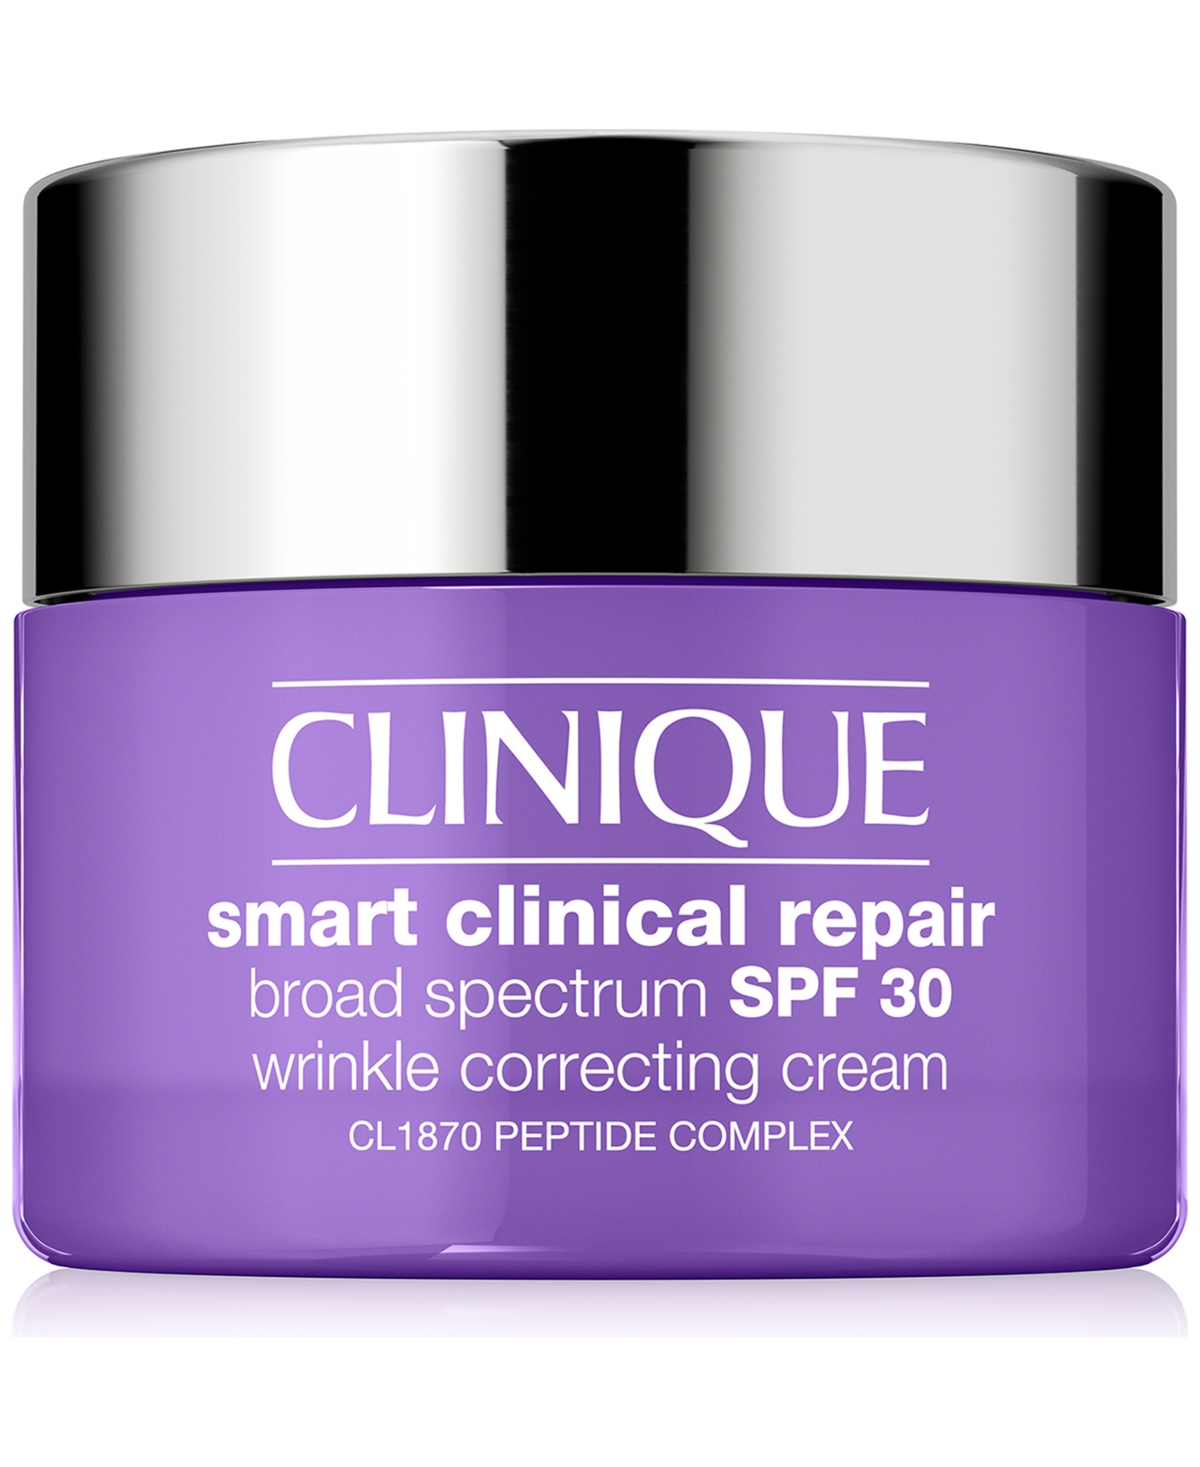 Clinique Smart Clinical Repair Wrinkle Correcting Cream Spf 30, 0.5 Oz. In No Color